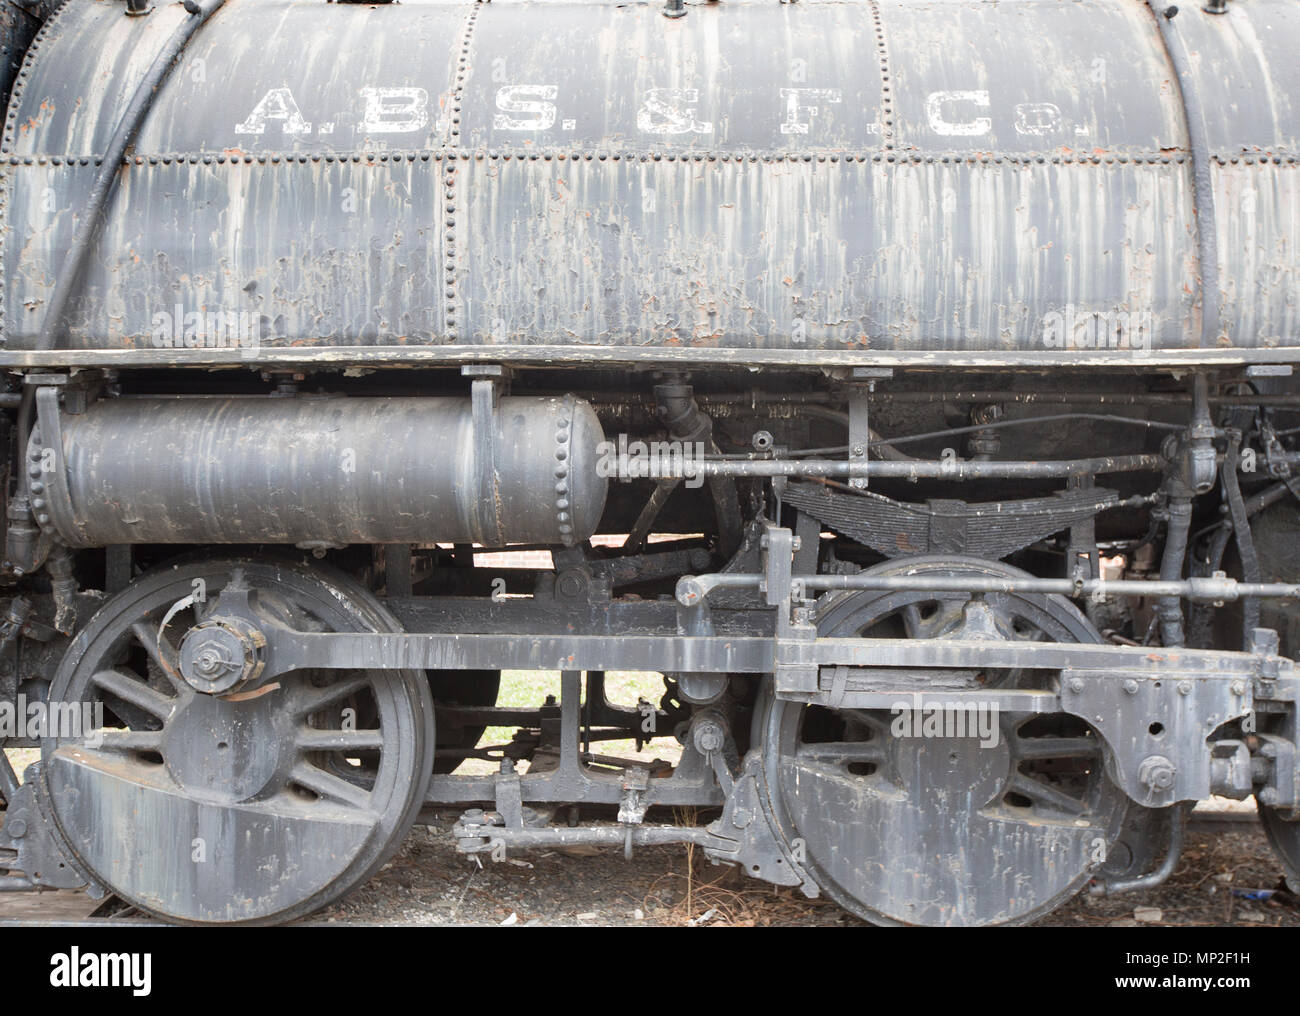 Locomotive at the Paterson Museum. Built in 1906 by the Cooke Locomotive and Machine Works in Paterson, NJ Stock Photo